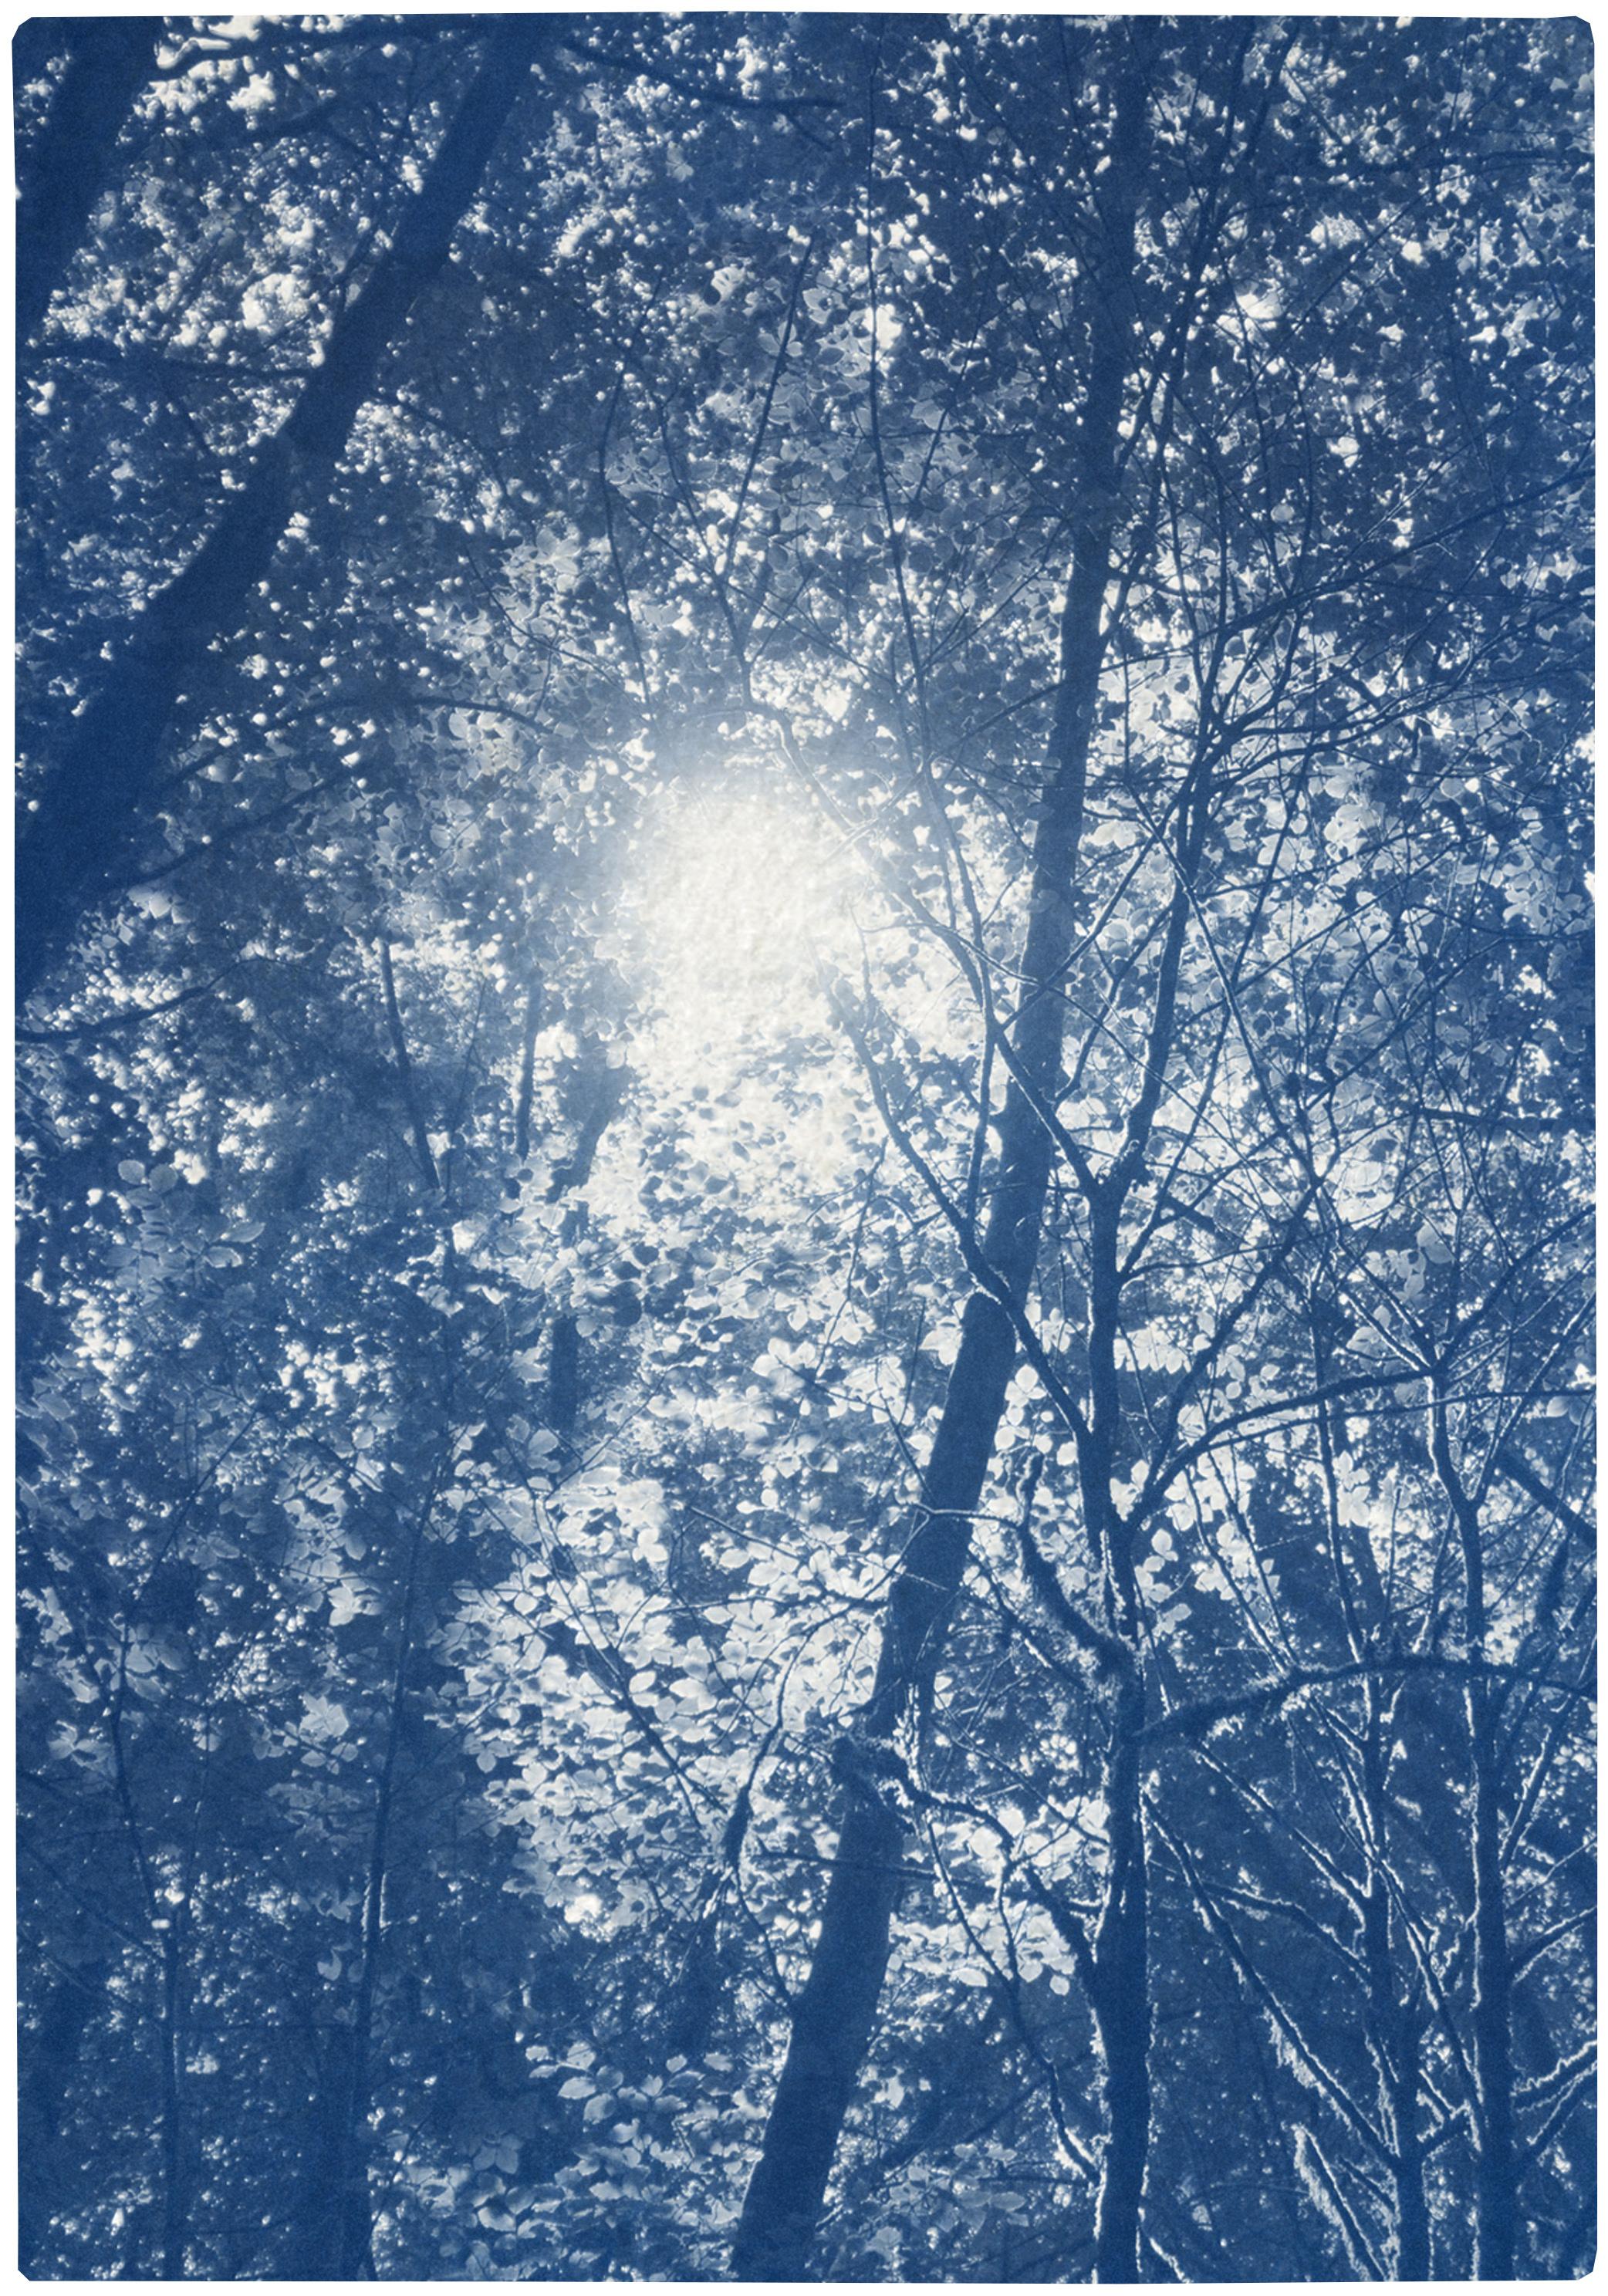 Forest Triptych, Looking Up Through The Trees, Blue Nature, Handmade Cyanotype - Realist Print by Kind of Cyan